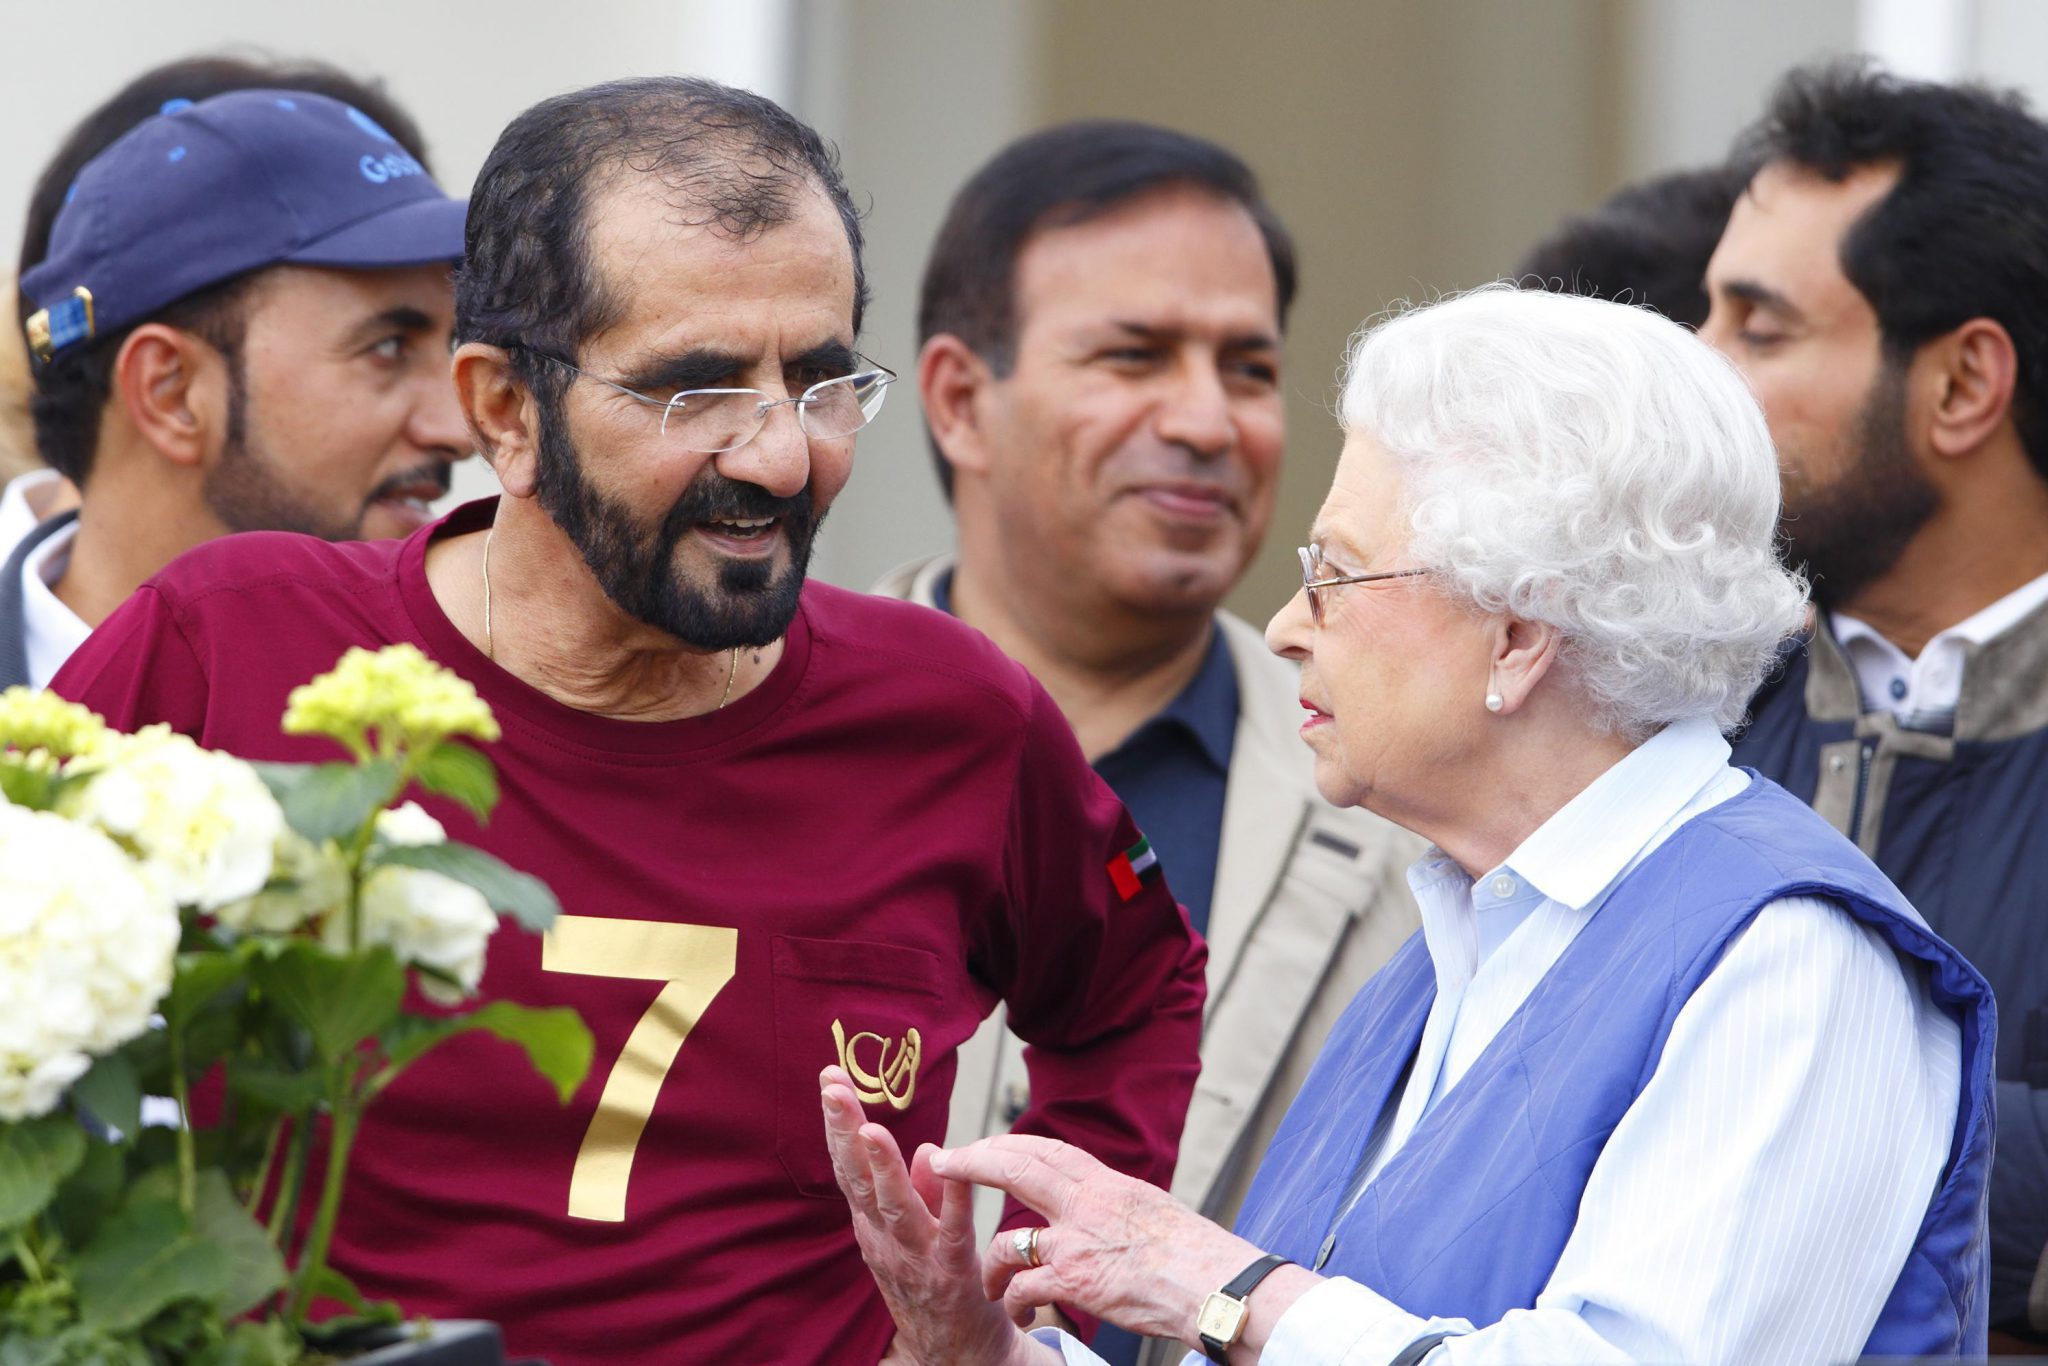 Dubai Sheikh’s friendship with Queen is one of many ties that bind